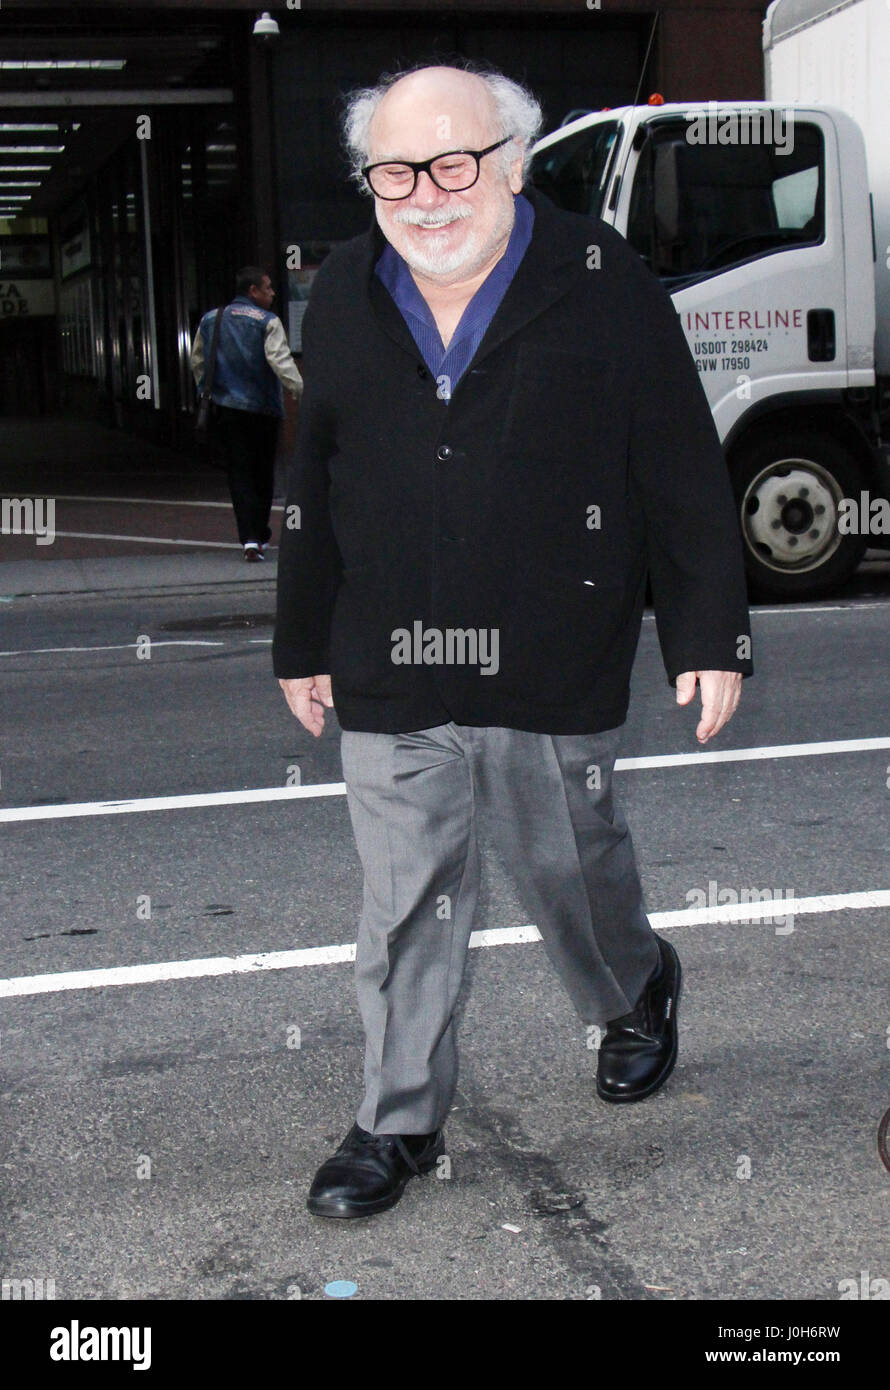 New York, NY, USA. 13th Apr, 2017. Danny DeVito seen arriving to NBC's Today Show promoting his new Broadway play The Price on April 13, 2017 in New York City. Credit: Rw/Media Punch/Alamy Live News Stock Photo